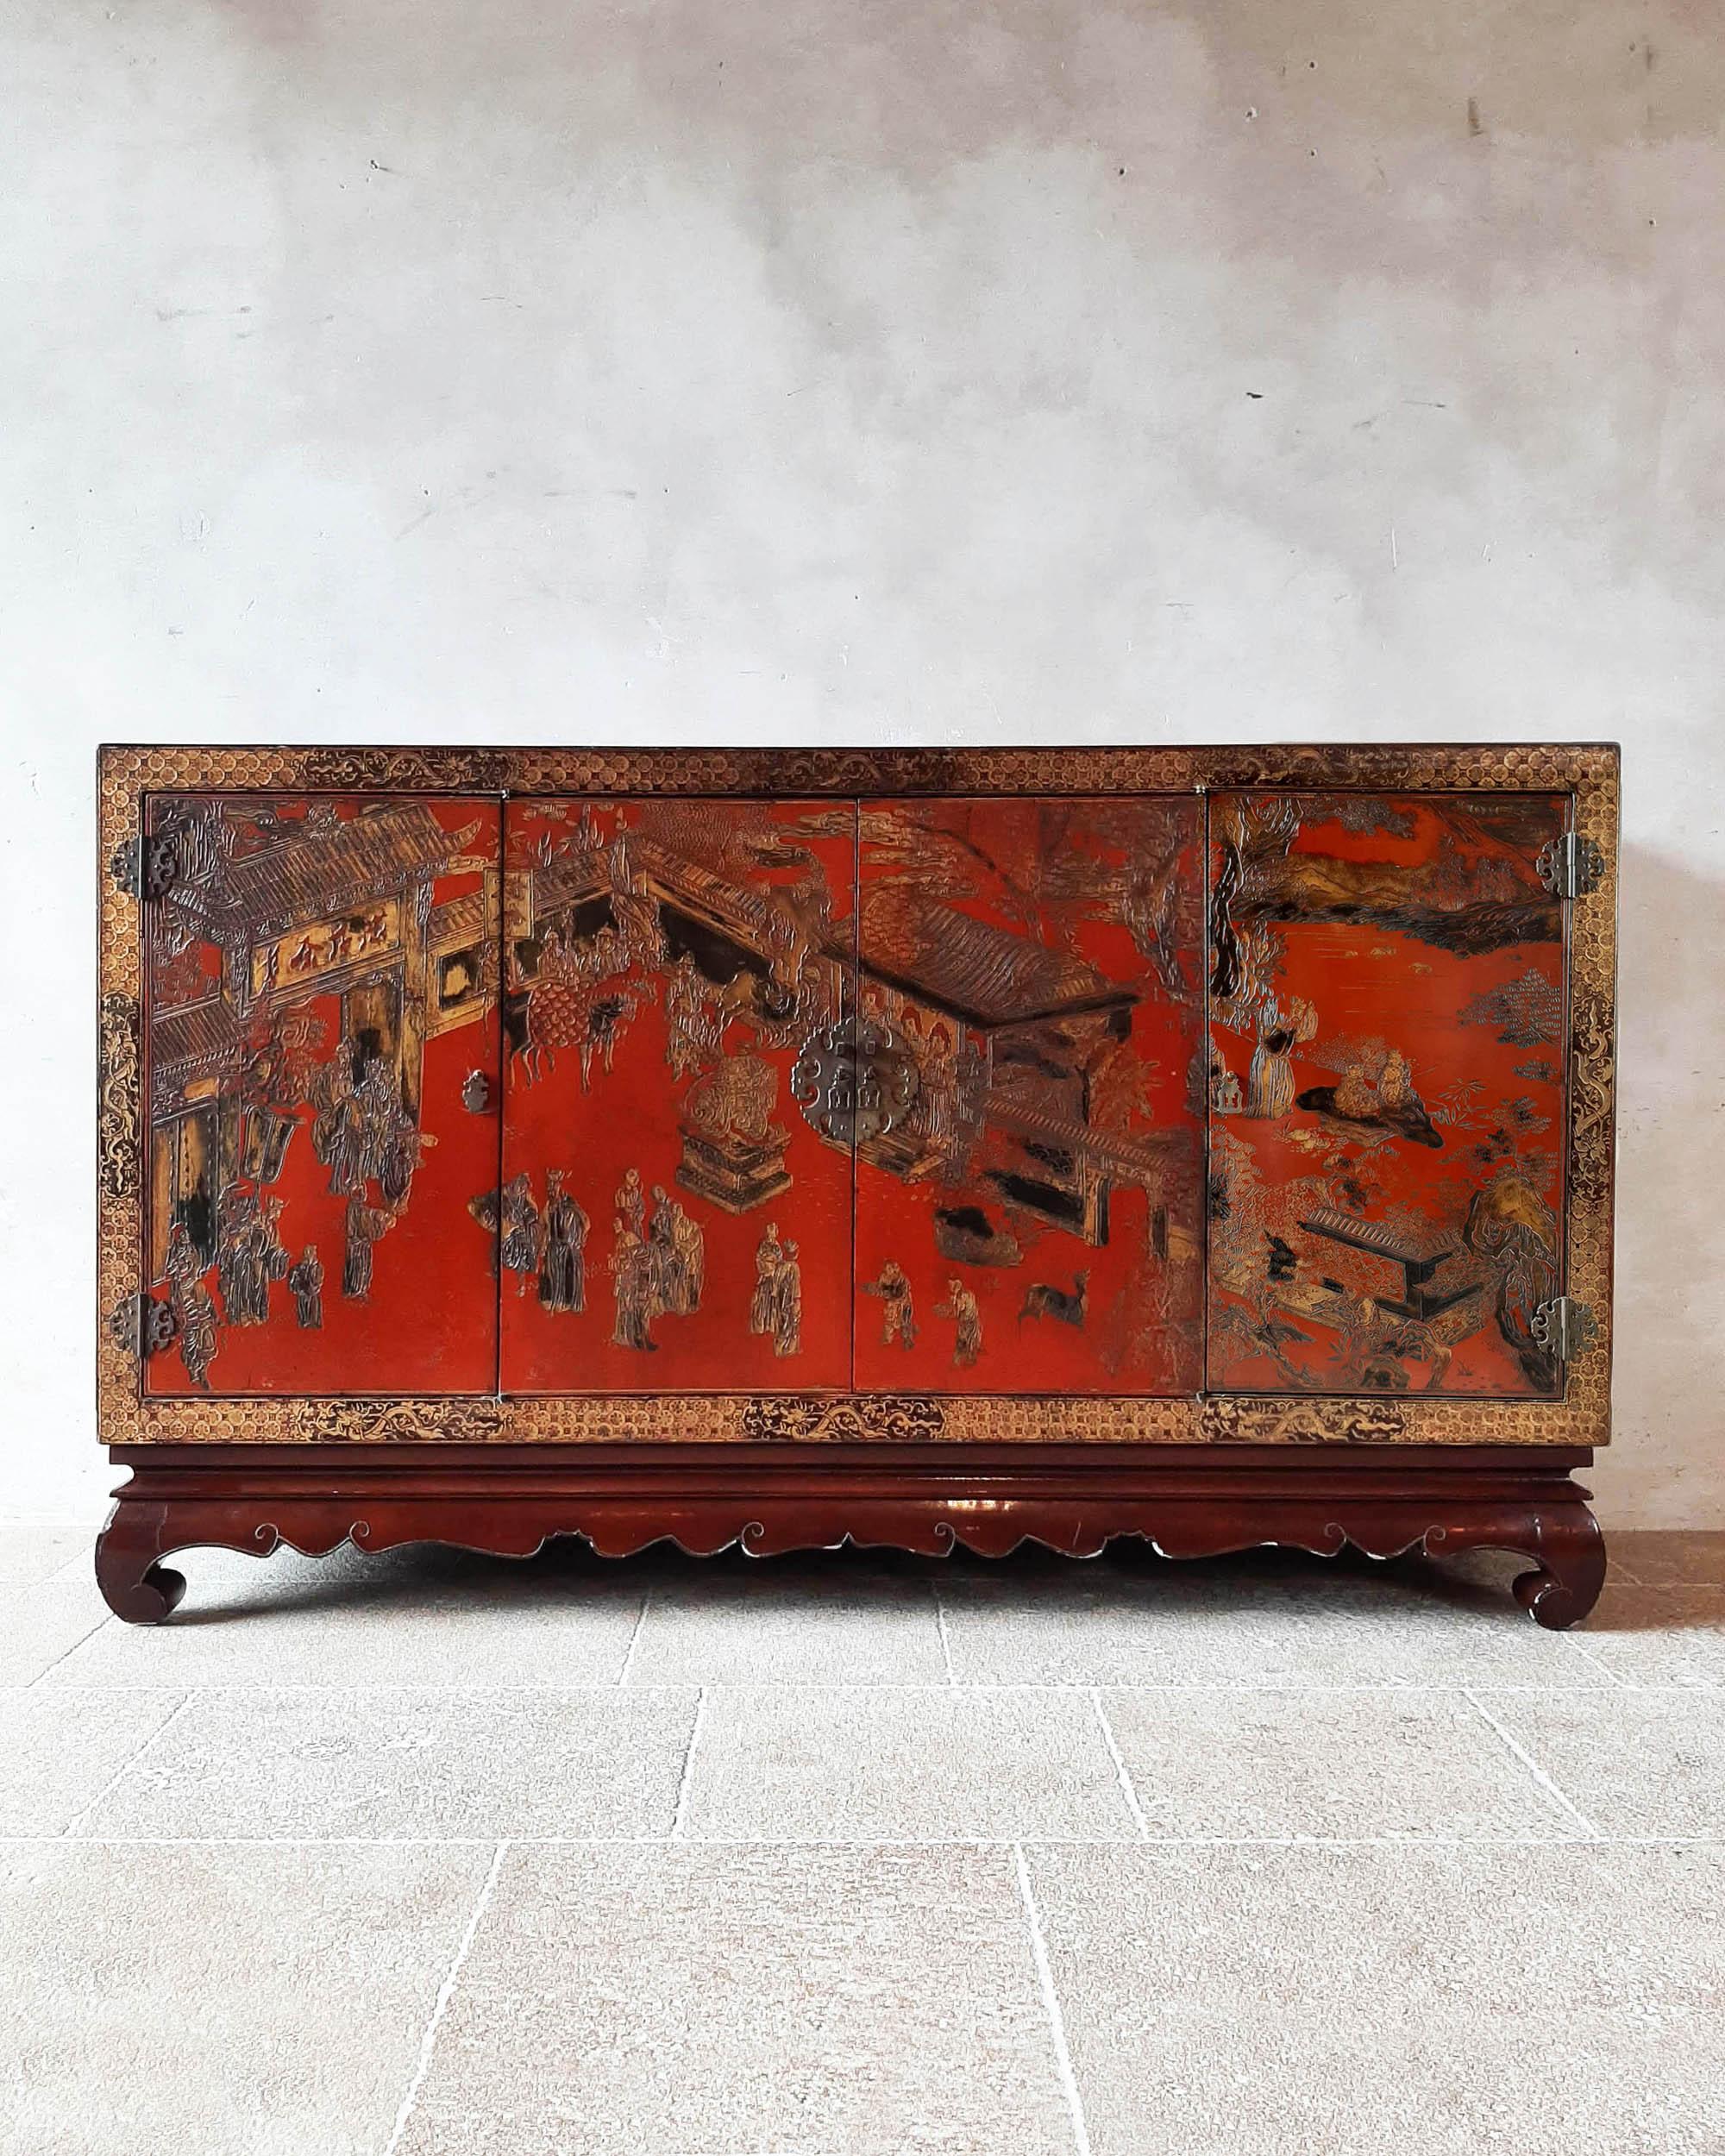 An antique Chinese red and brown lacquered and painted sideboard decorated with beautiful carved and painted gold and black chinoiserie motifs in relief.

L 197 x W 46,5 x H 116 cm

some scratches, damage to lacquer, see photos